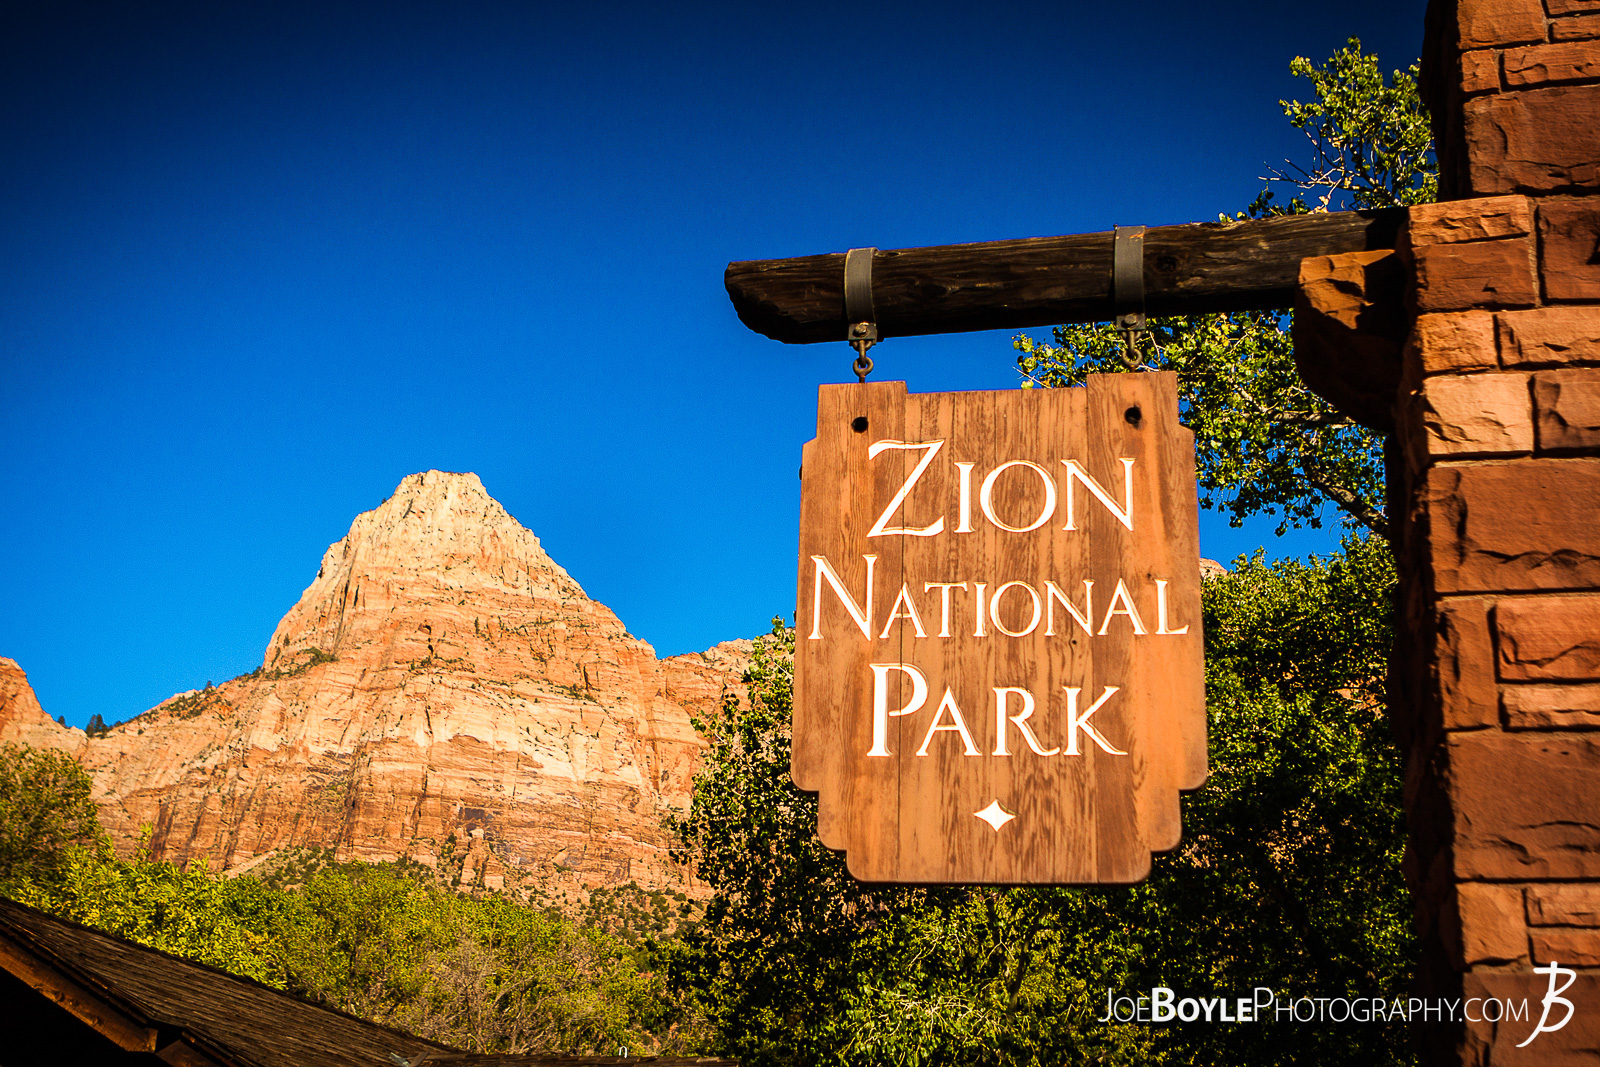  Here is a photo of the sign at the entrance of Zion National Park with a canyon in the background and a beautiful blue sky!  Here are some links to more articles and hiking info about the West Rim Trail and hiking trails in Zion National Park and a Map of Zion National Park. 